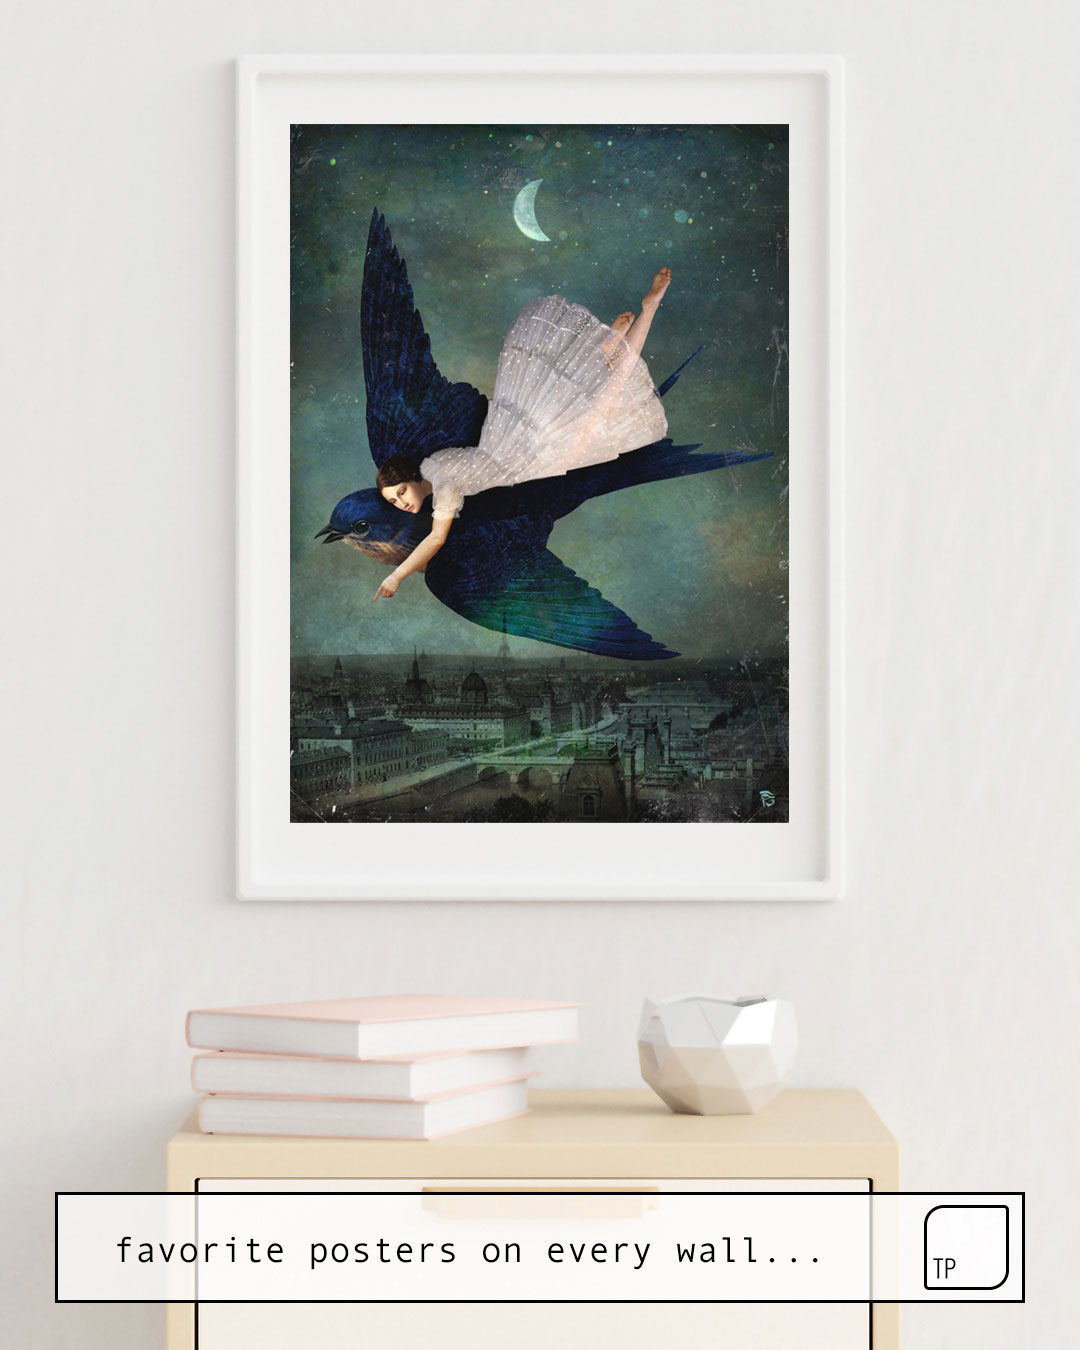 The photo shows an example of furnishing with the motif FLY ME TO PARIS by Christian Schloe as mural